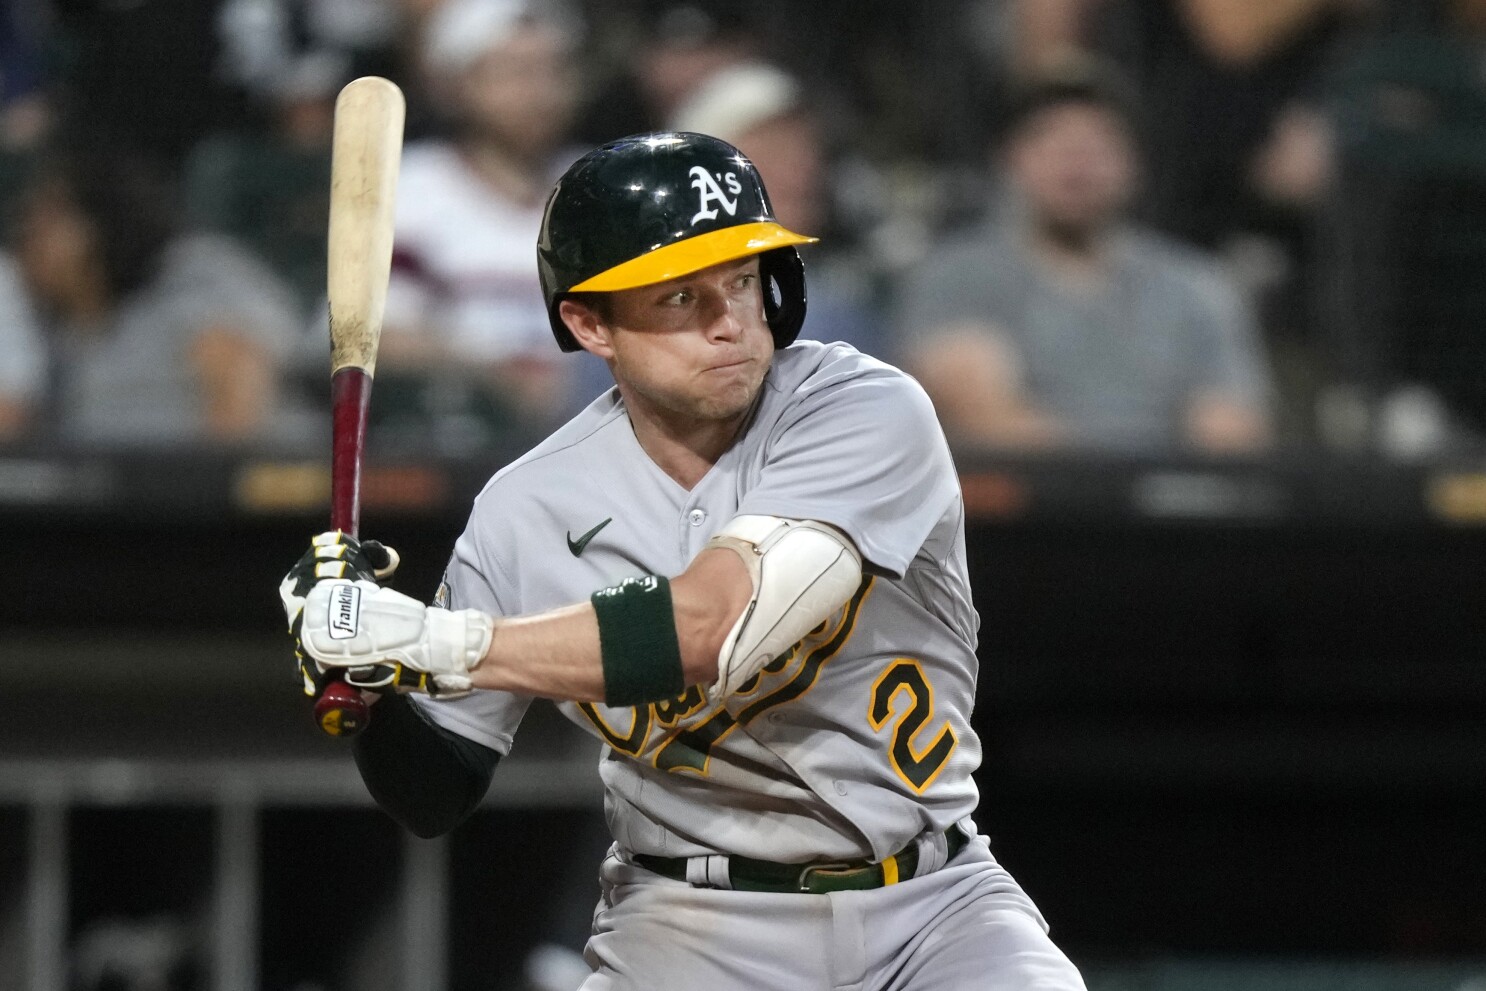 Colon's 5-hitter leads A's past White Sox 3-0 - The San Diego